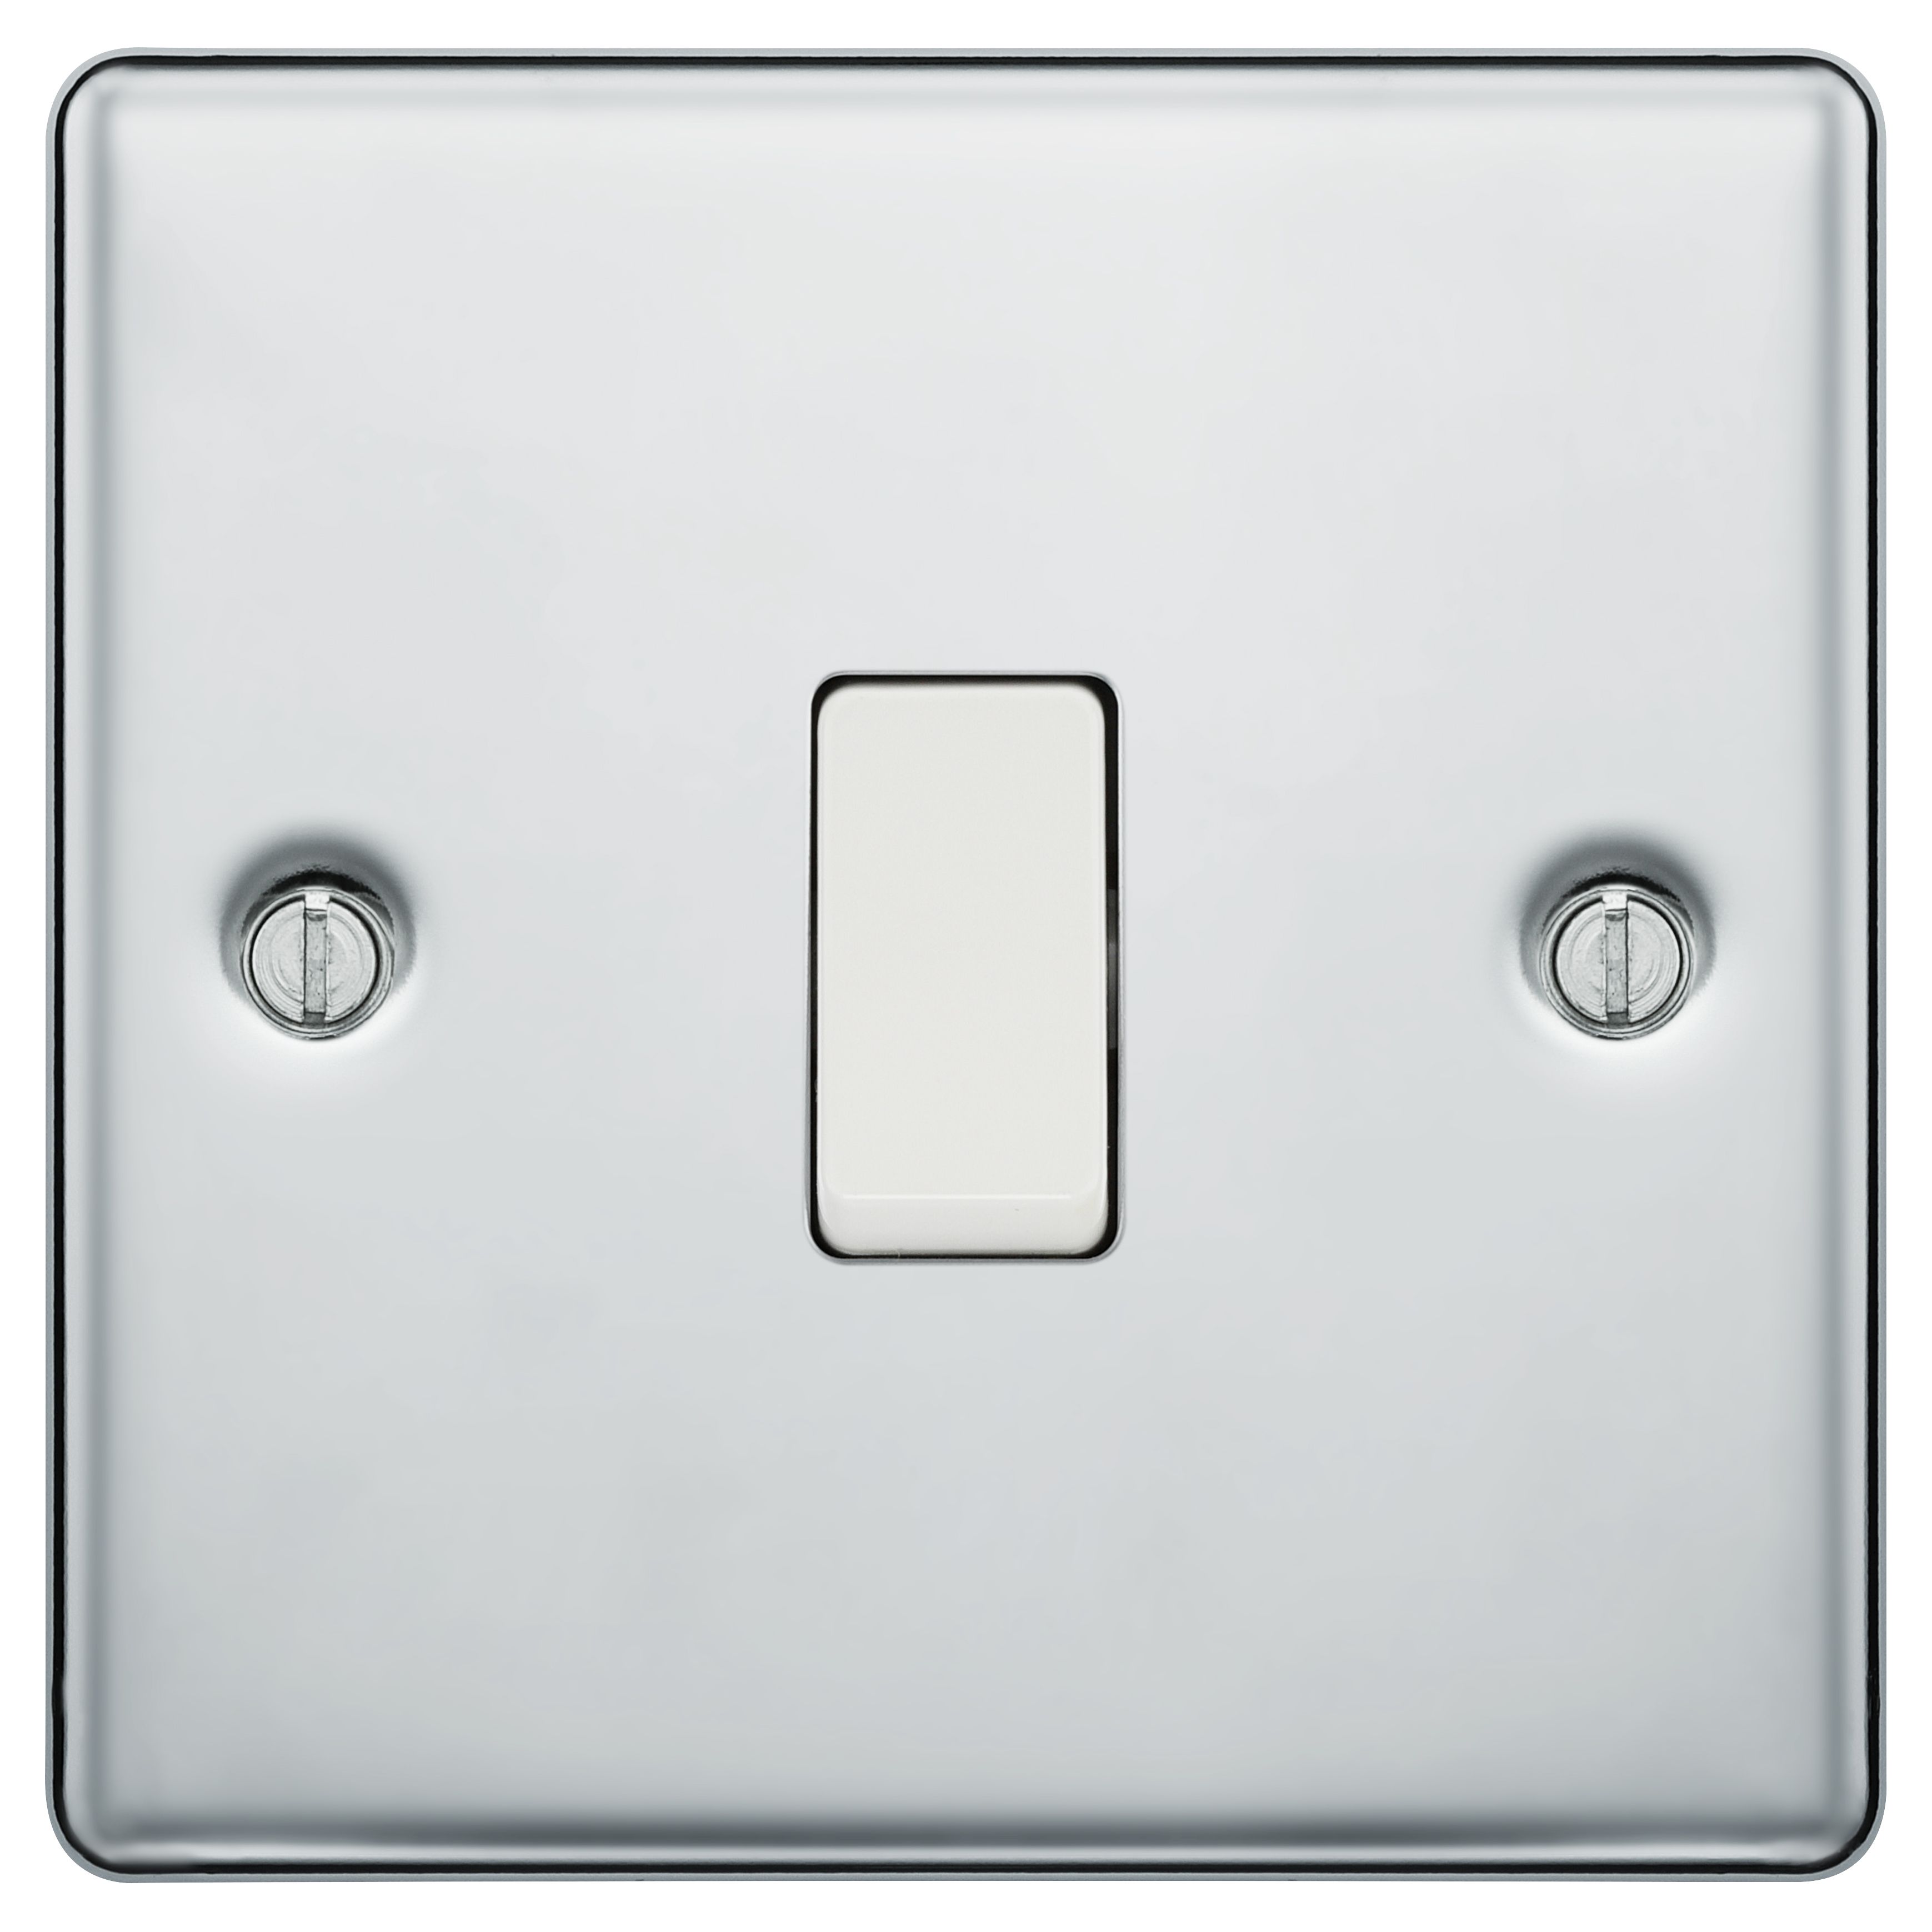 GoodHome 20A Single 2 way Raised rounded Screwed Intermediate switch Gloss Chrome effect